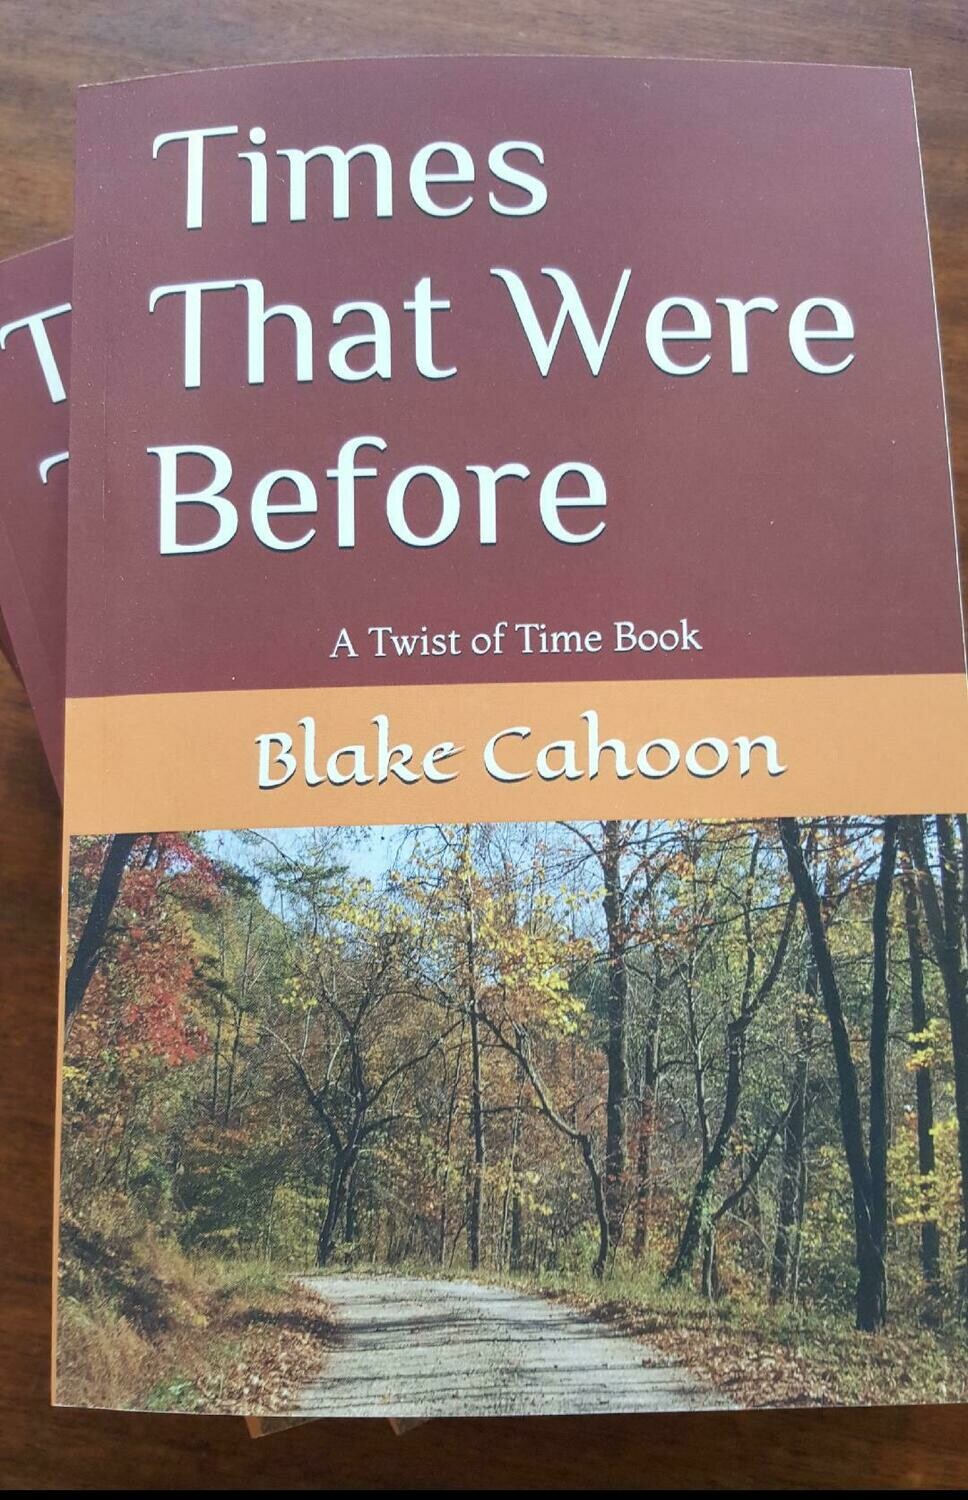 Times That Were Before by Blake Cahoon